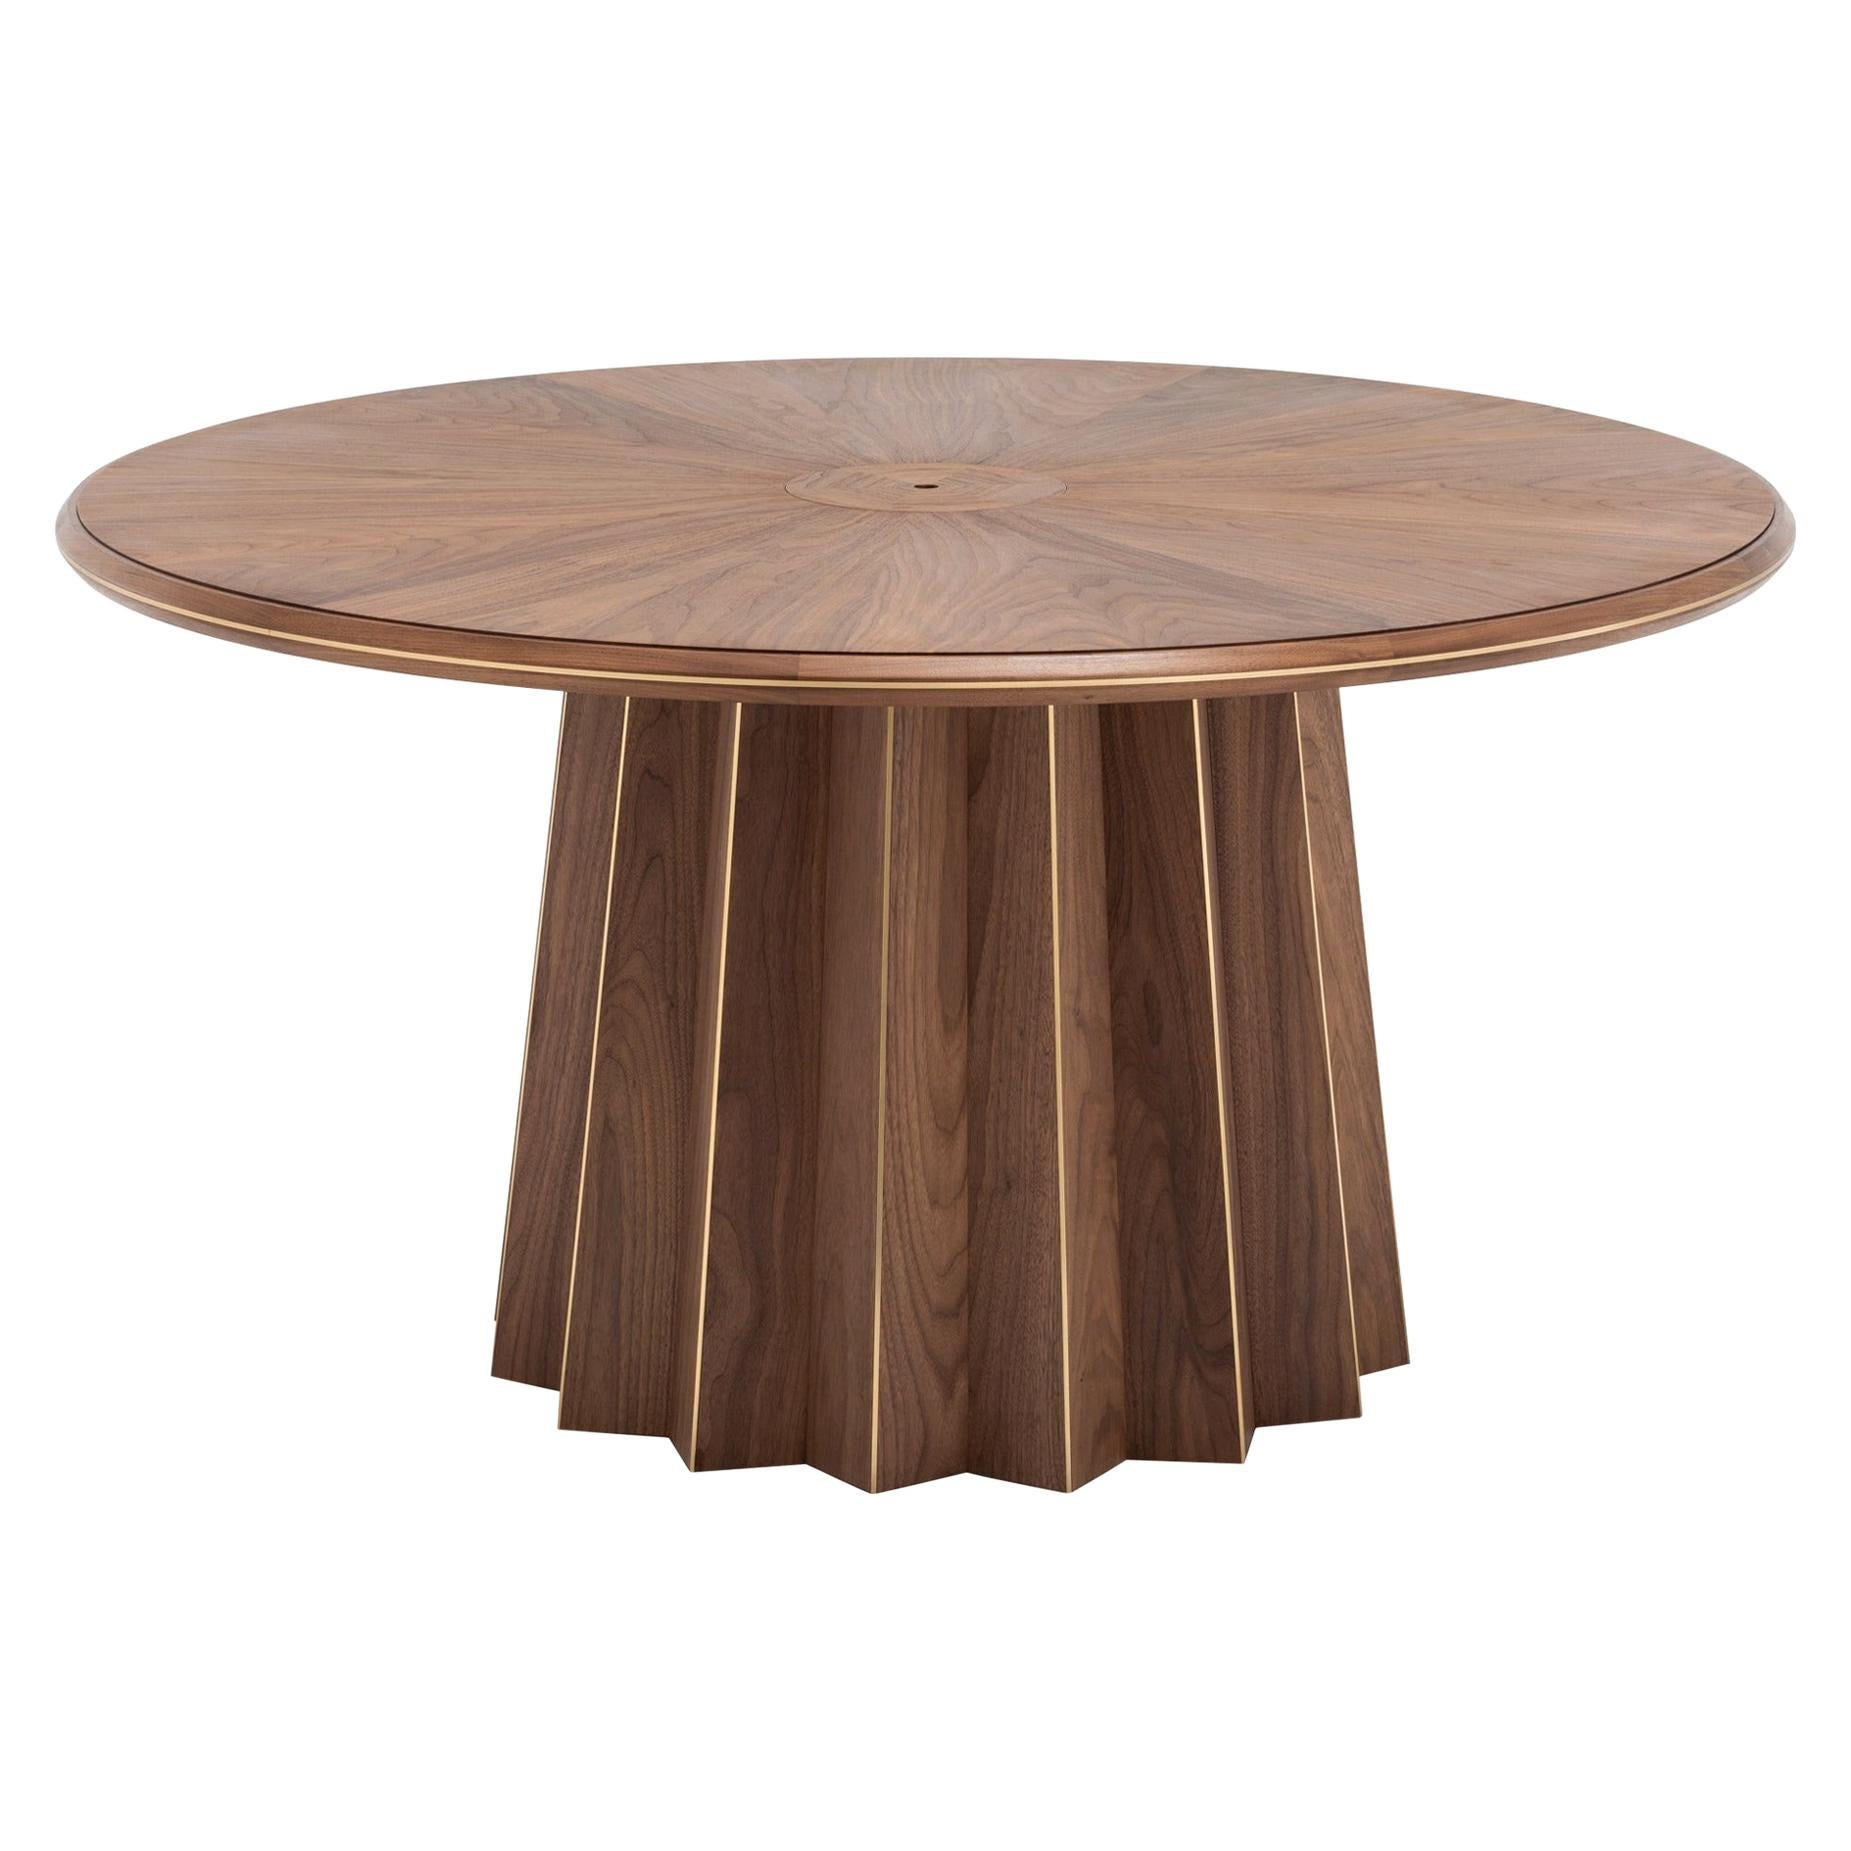 Art Deco Style Round Wooden and Brass Finish Pedestal Table